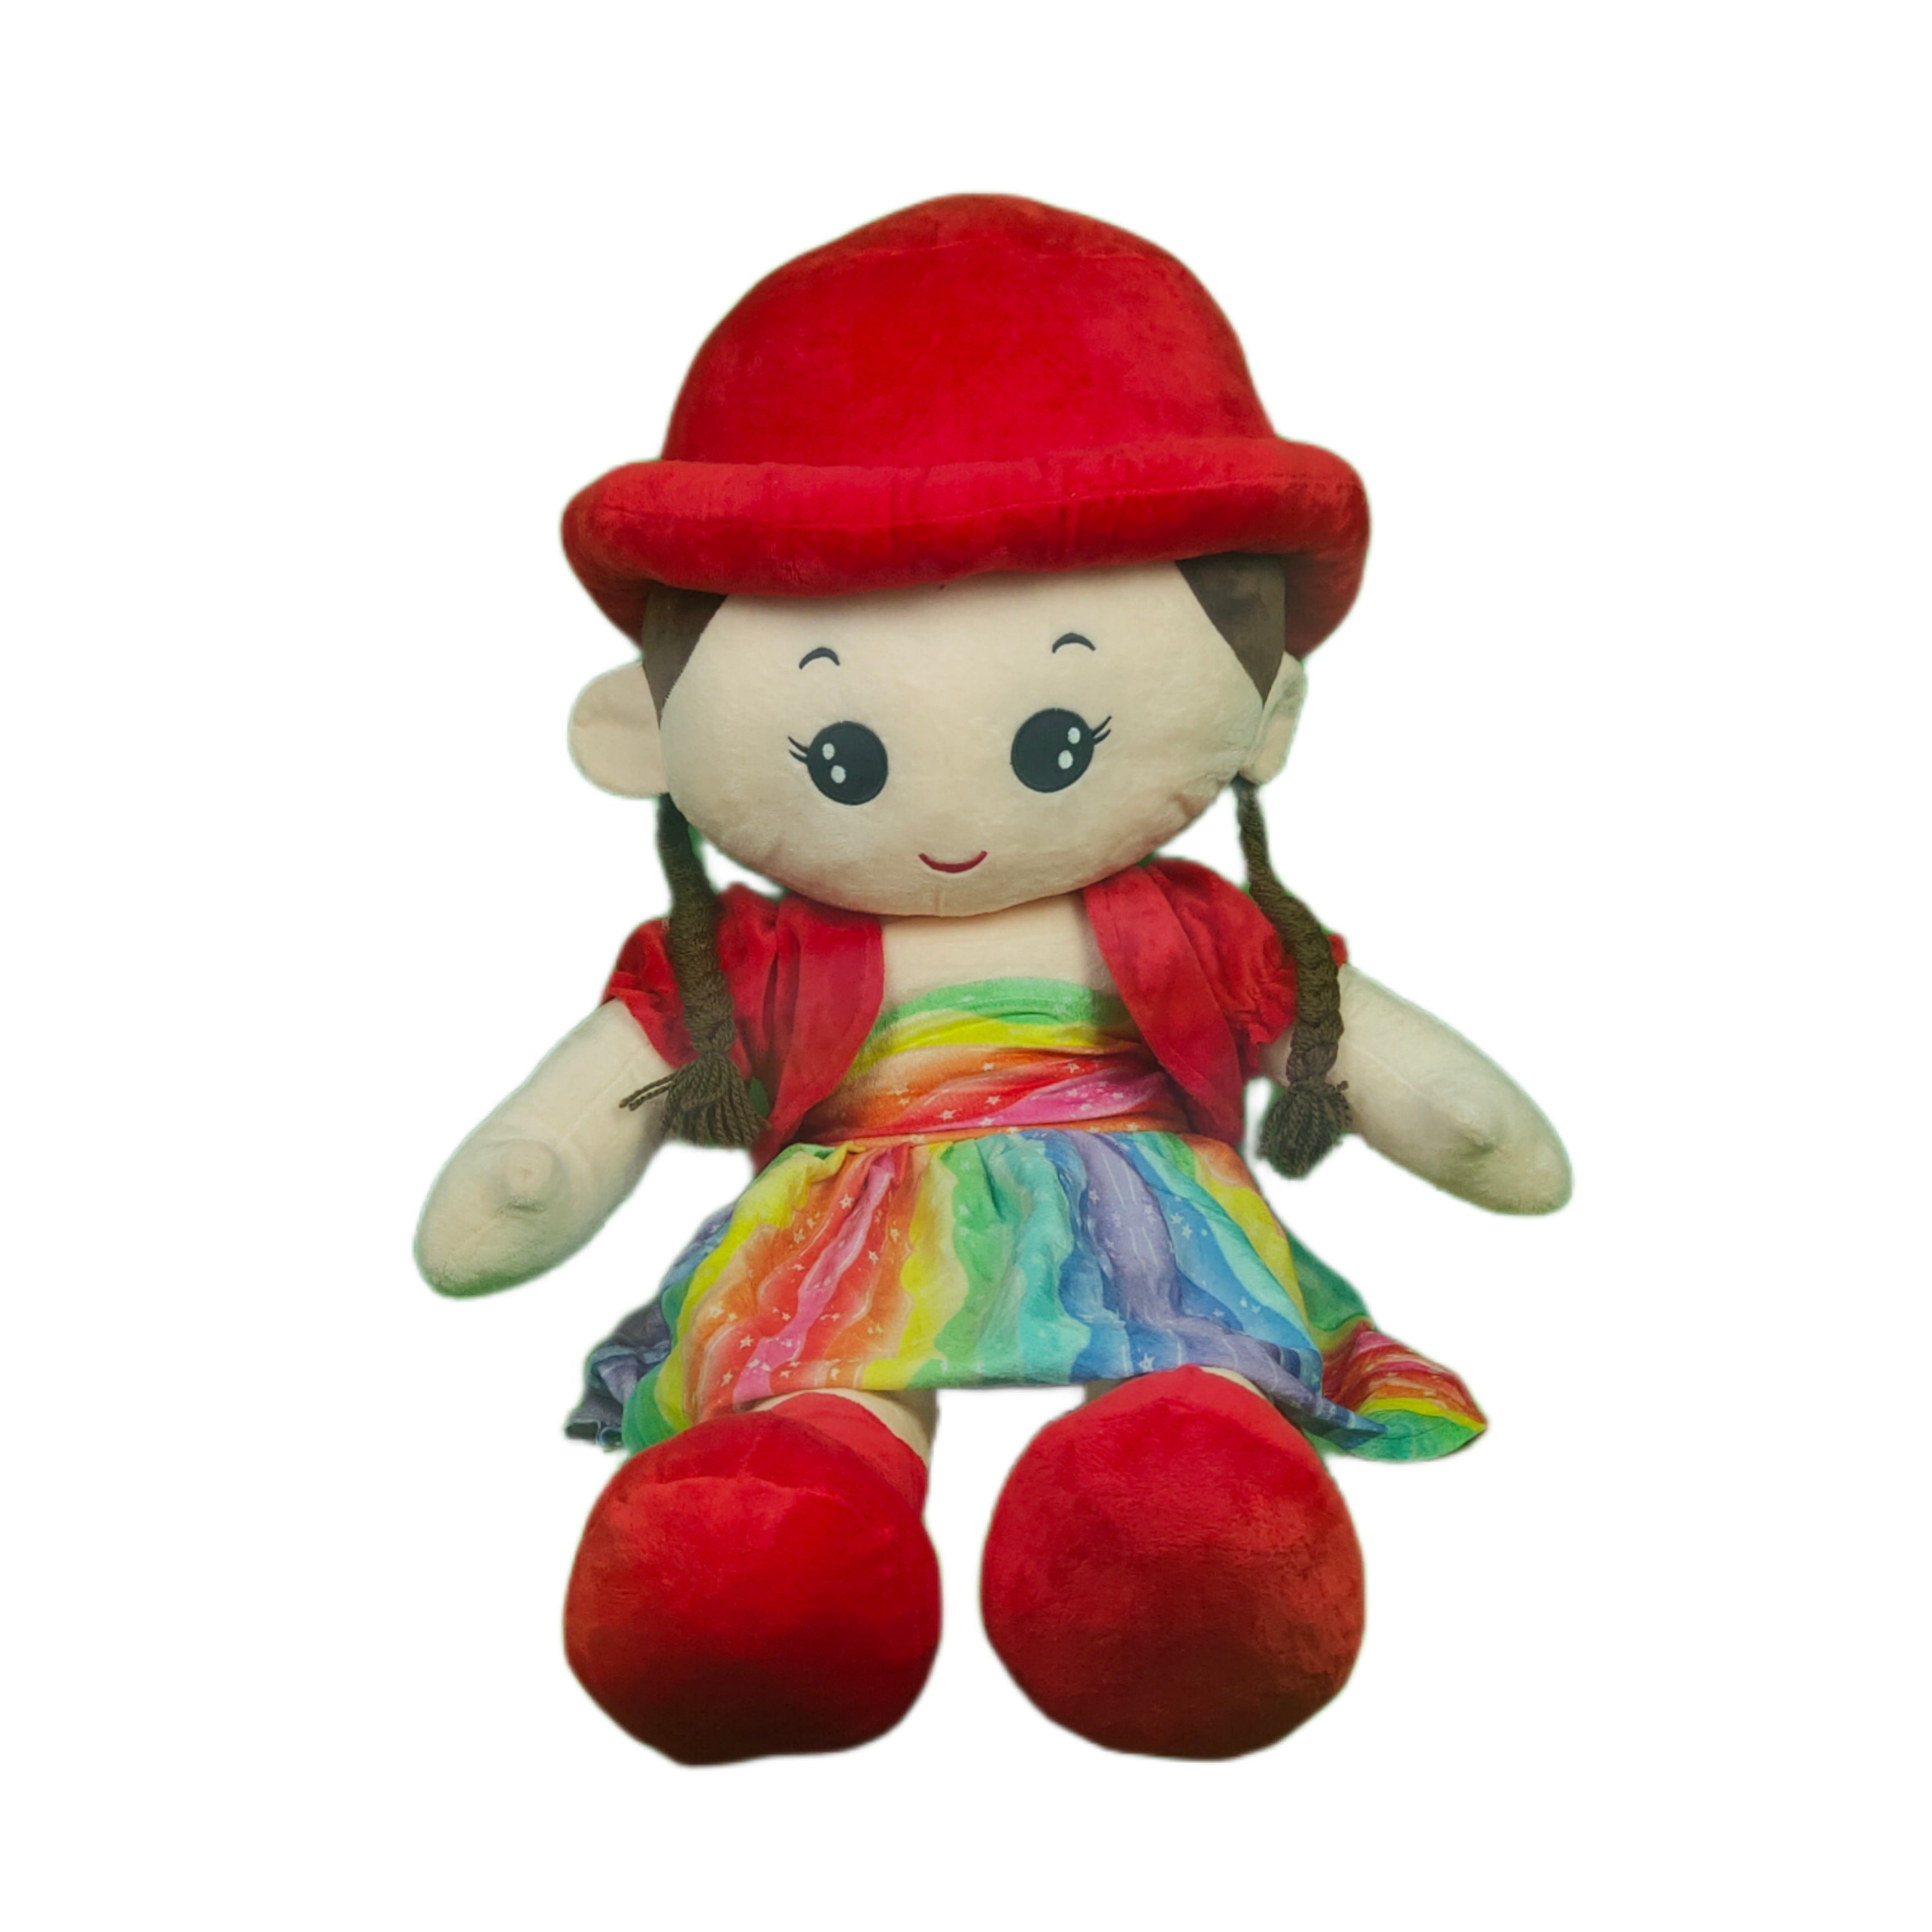 Play Hour Rag Doll Plush Soft Toy Wearing Yellow Red for Ages 3 Years and Up, 90cm